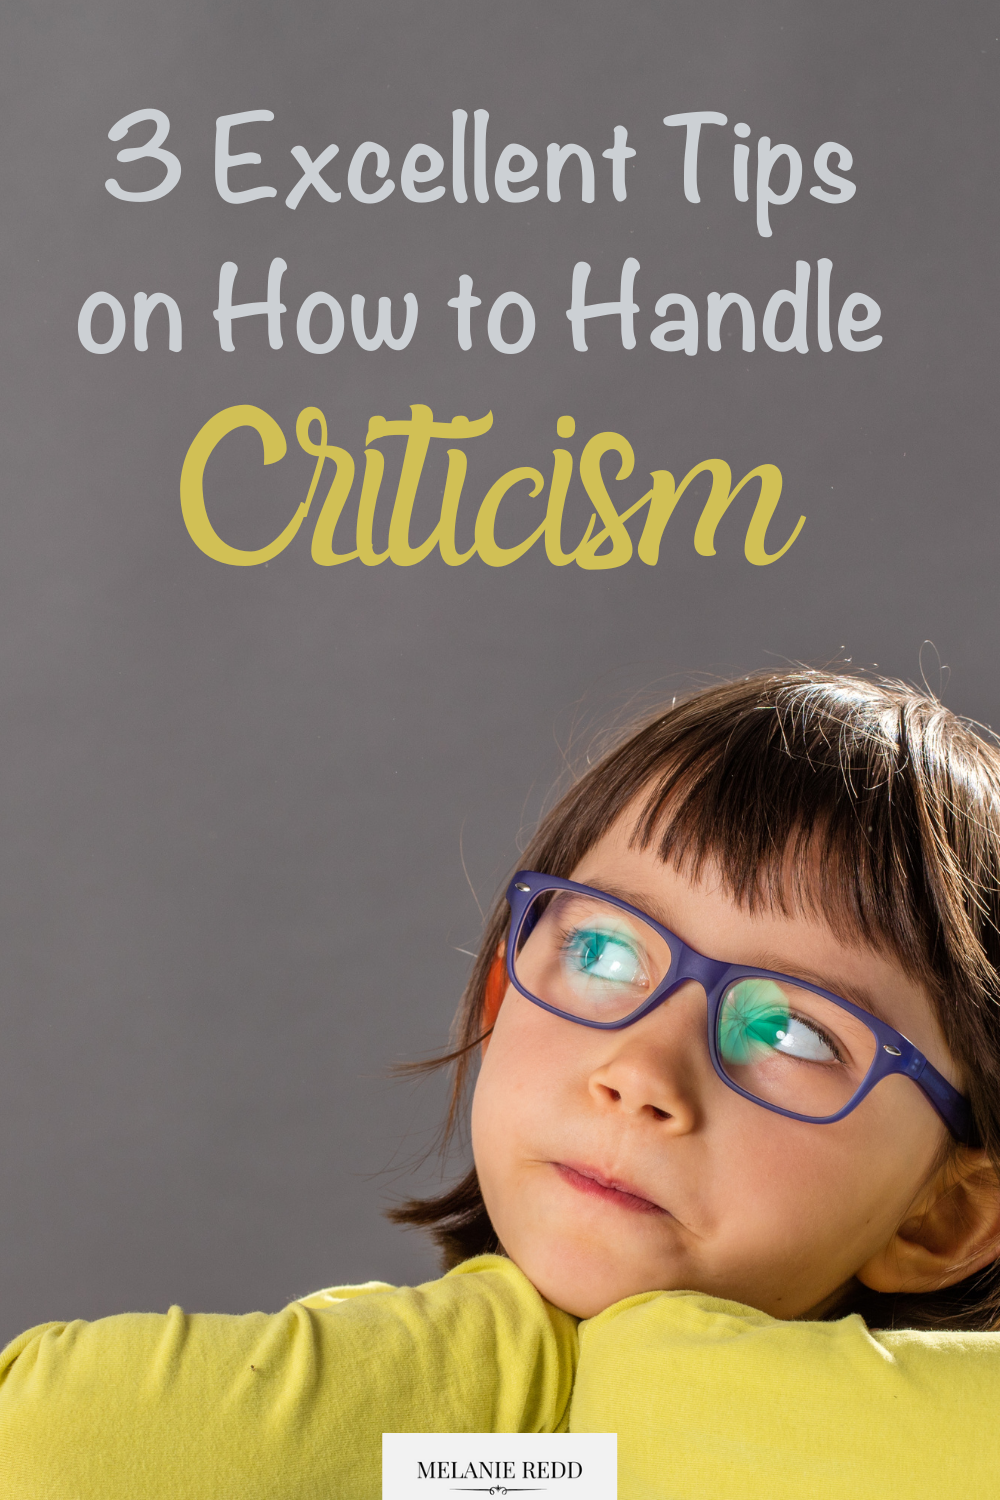 We all have things said to us and about us that are critical. This can be hard. Here are 3 excellent tips on how to better handle criticism.